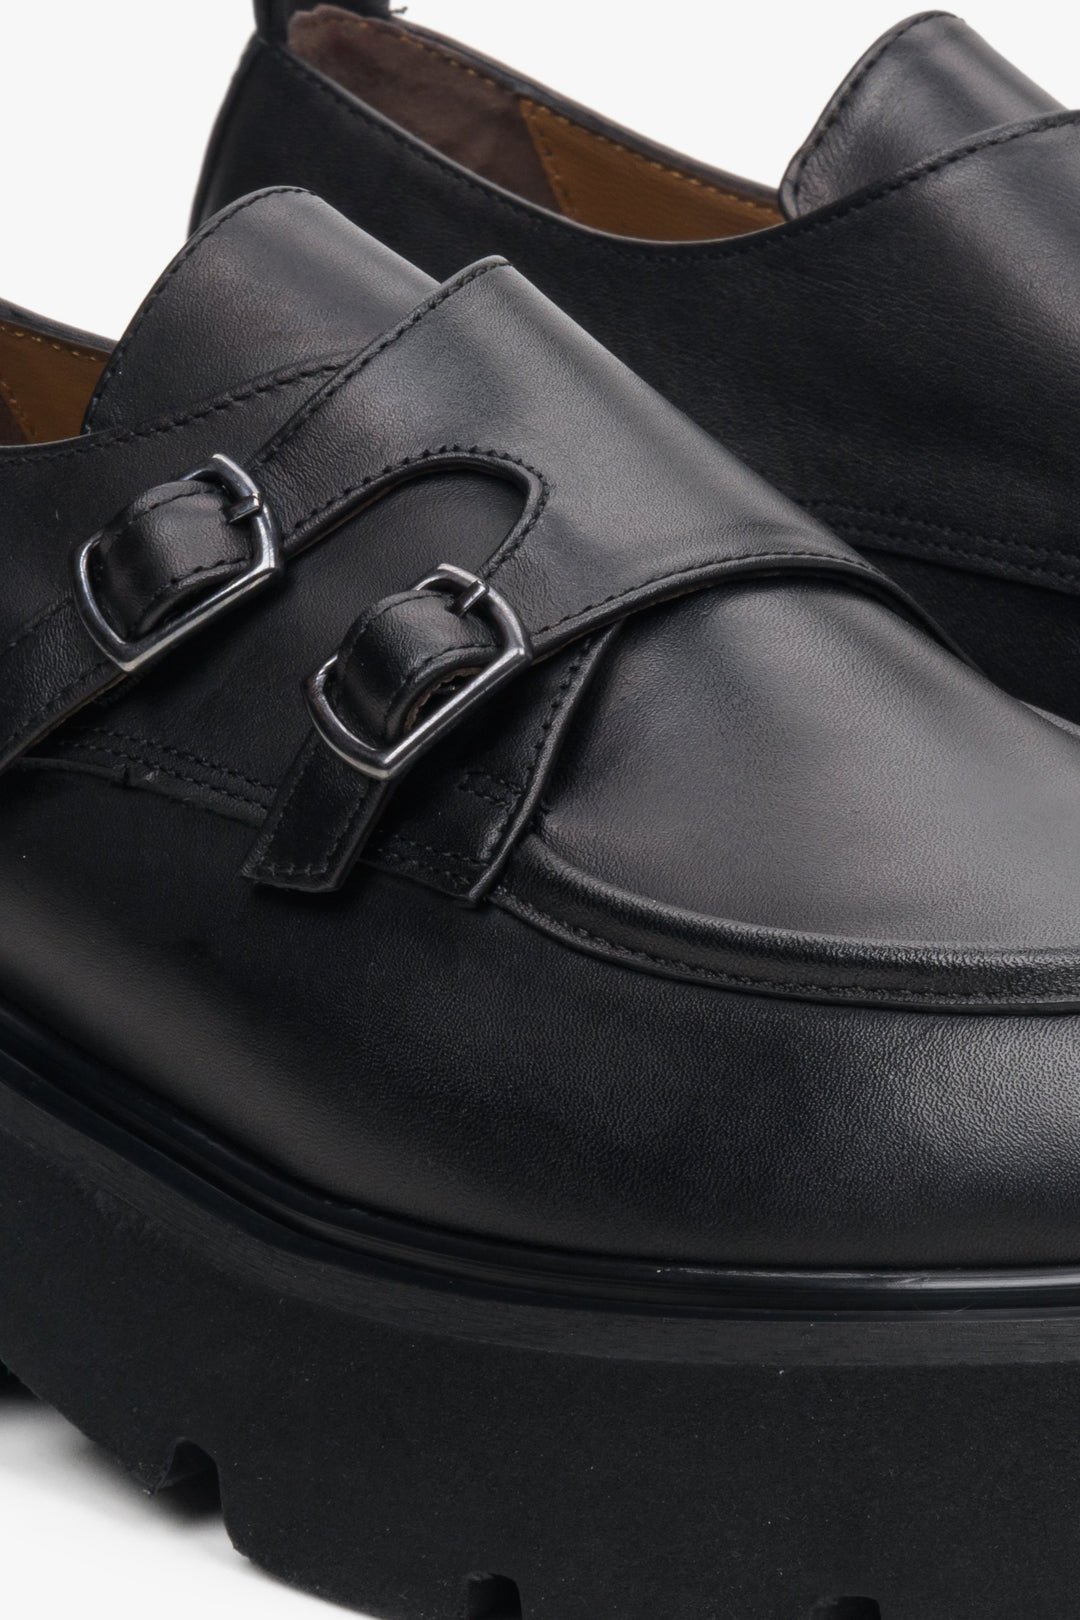 Women's black leather shoes by Estro with a decorative buckle - close-up on the detail.